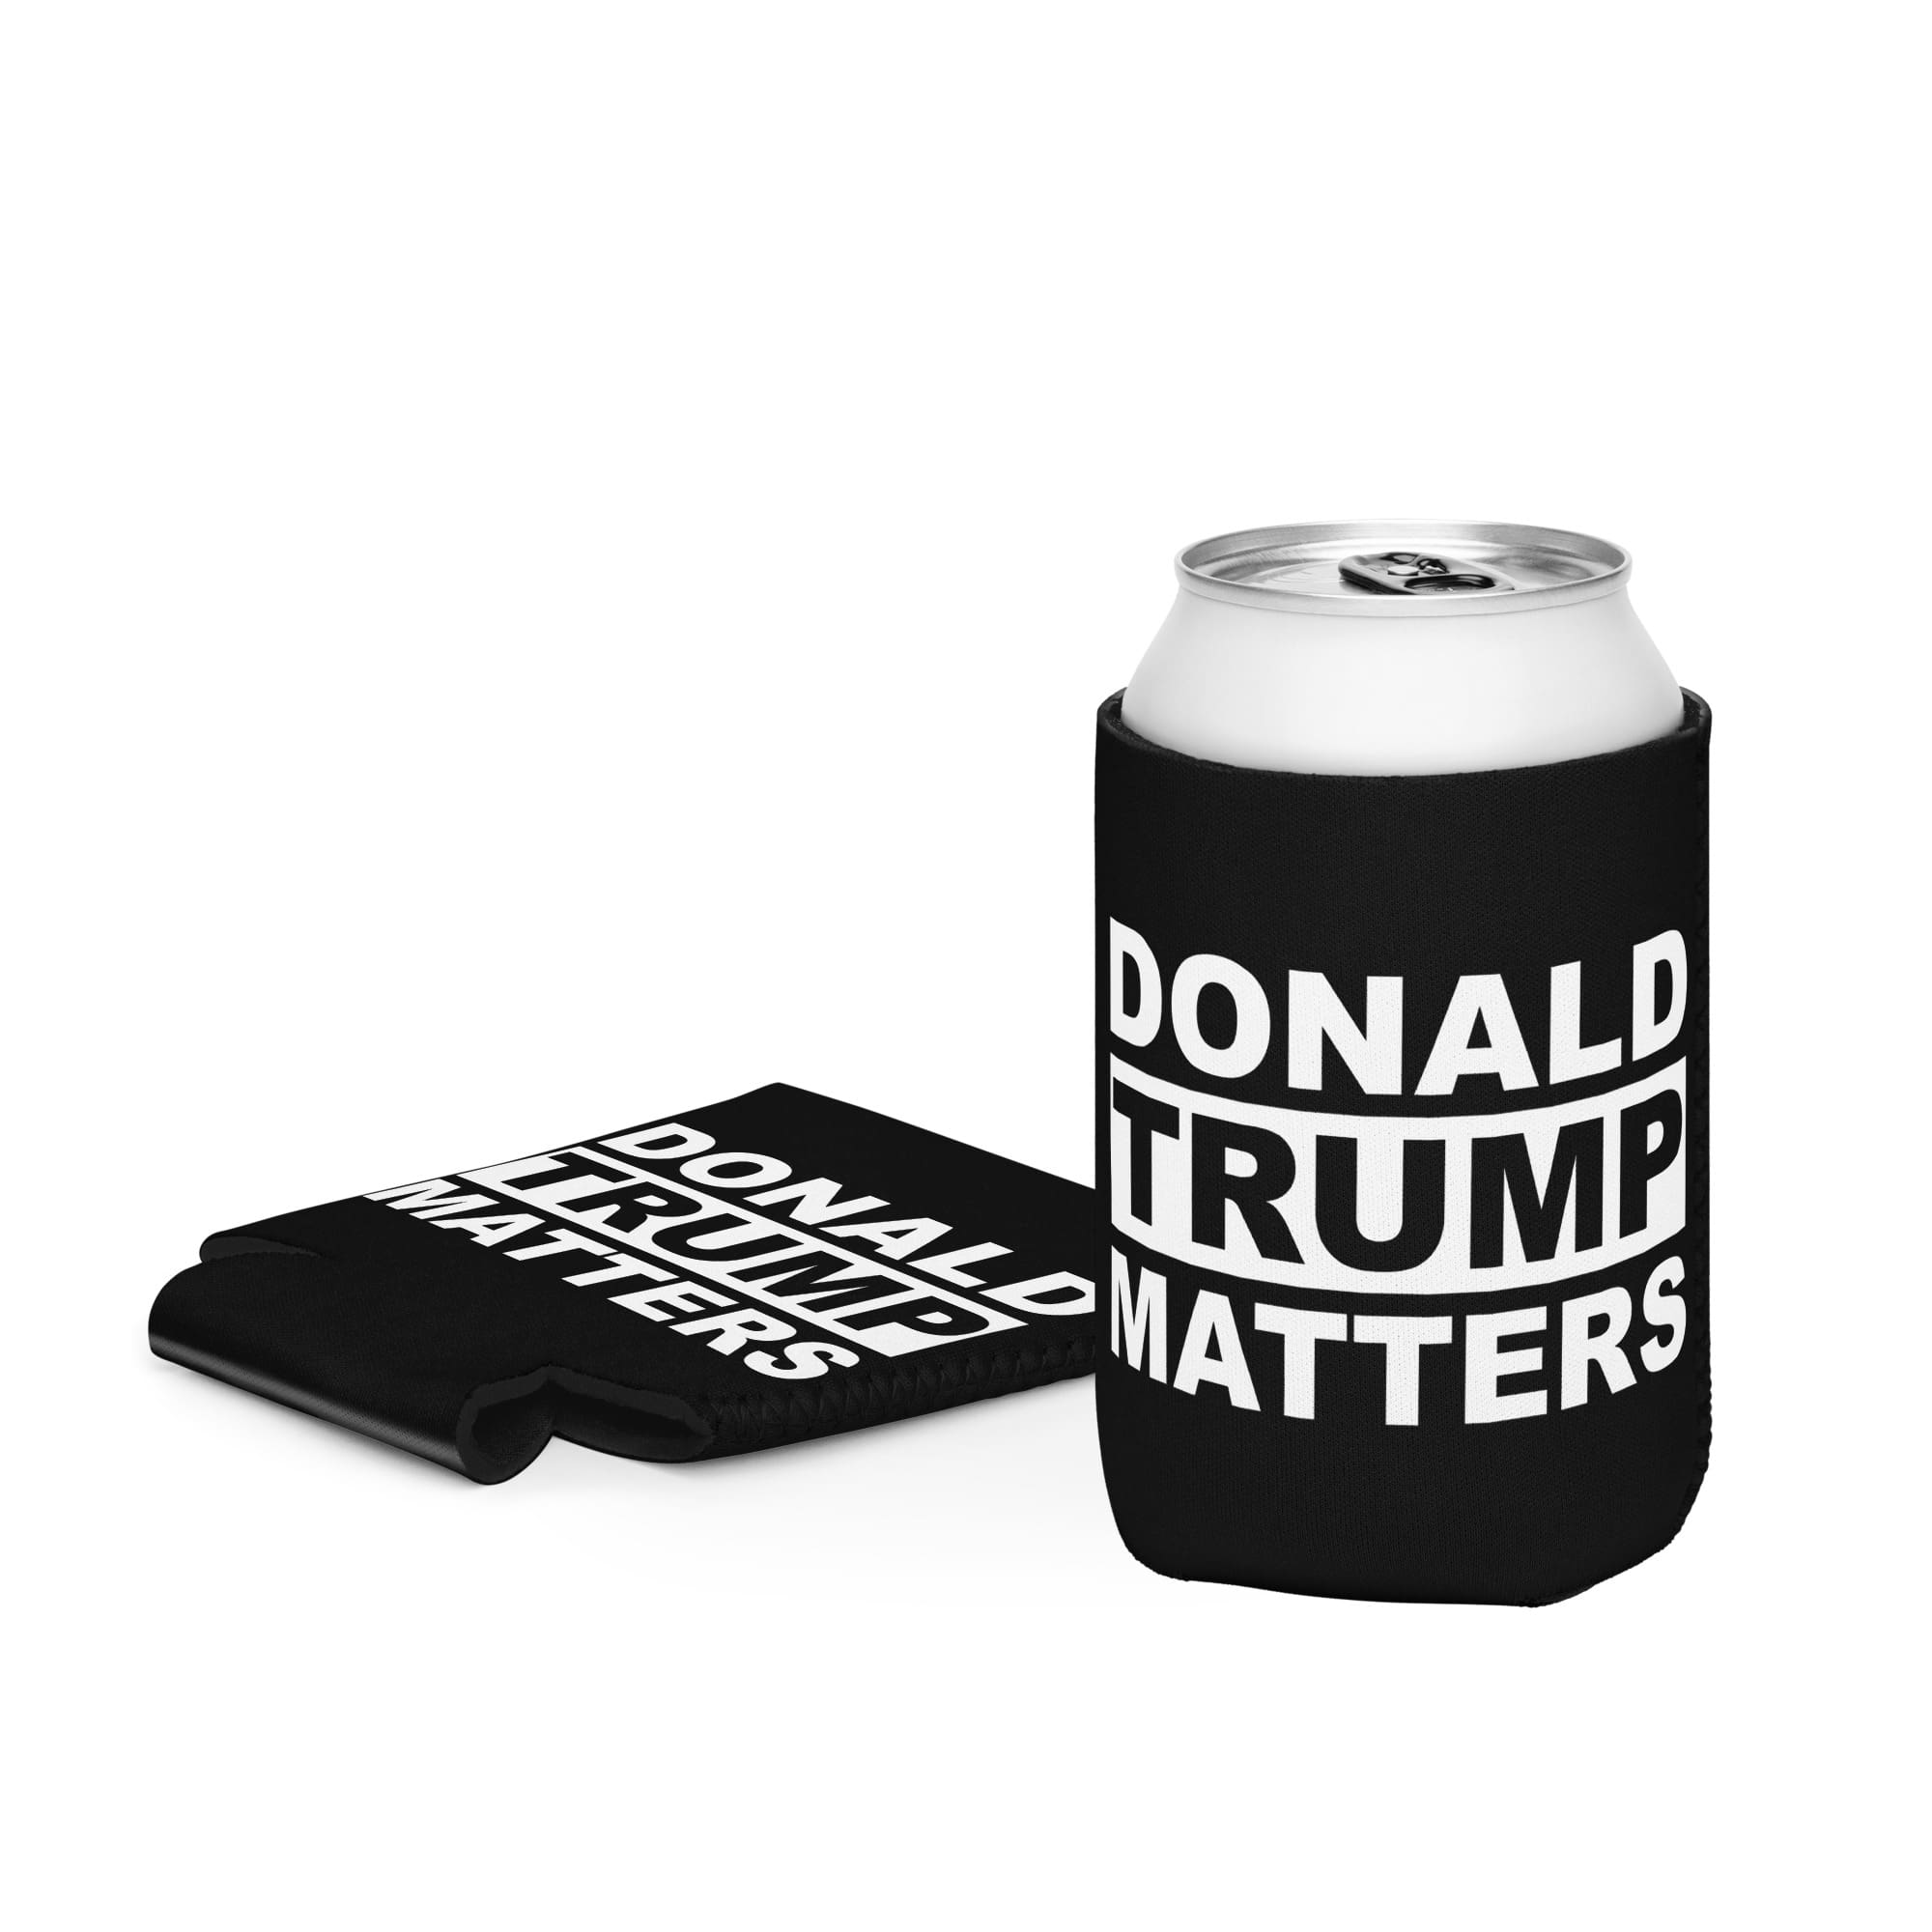 Donald Trump Matters Can Cooler (Koozie) by Trump is Punk Rock